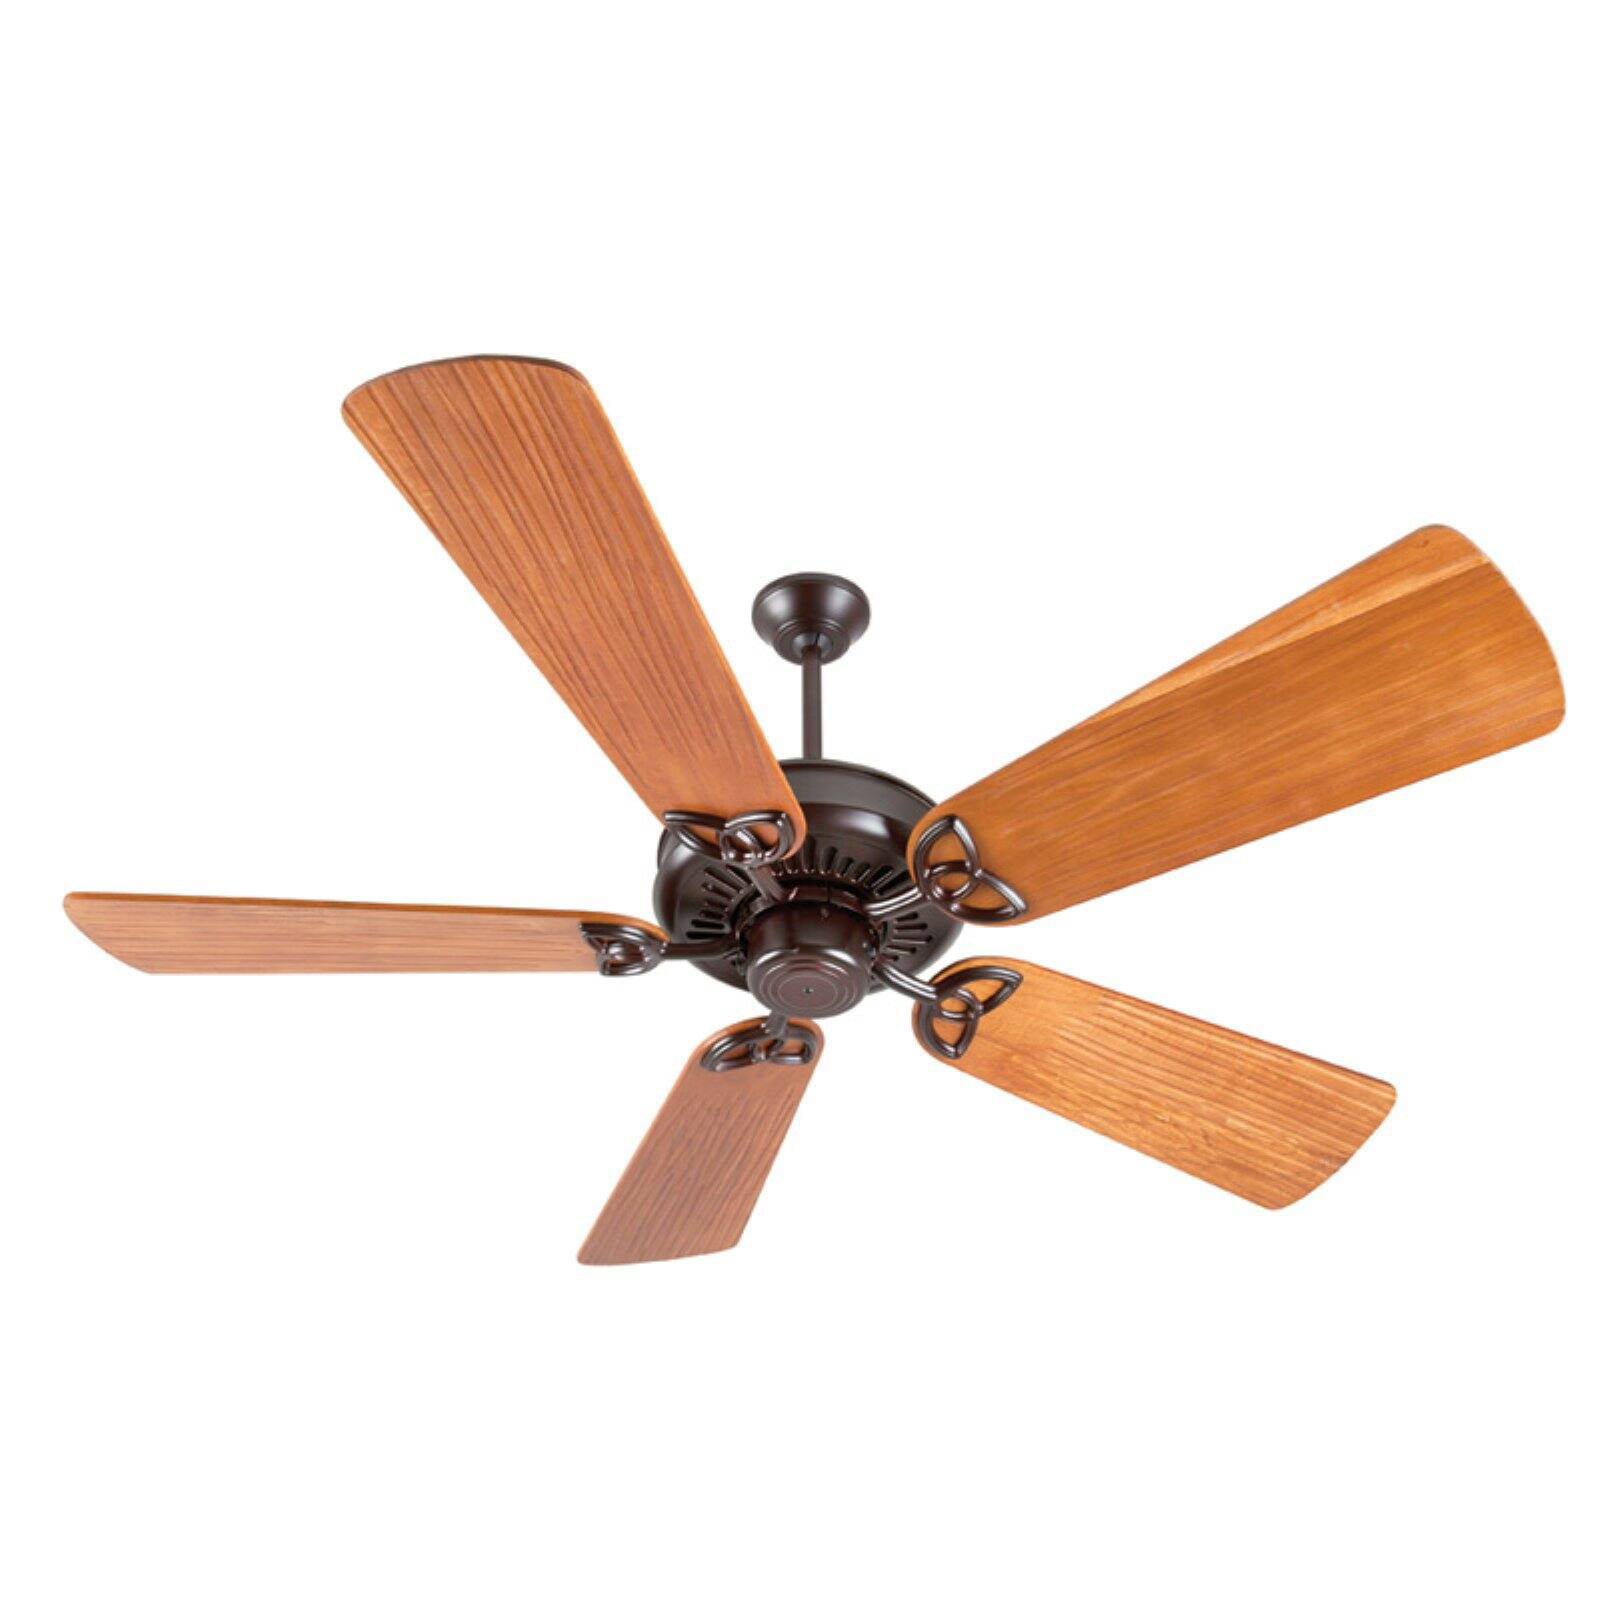 Craftmade K10323 Mia 52 Ceiling Fan with CFL Lights and Pull Chain Aged Bronze/Vintage Madera 